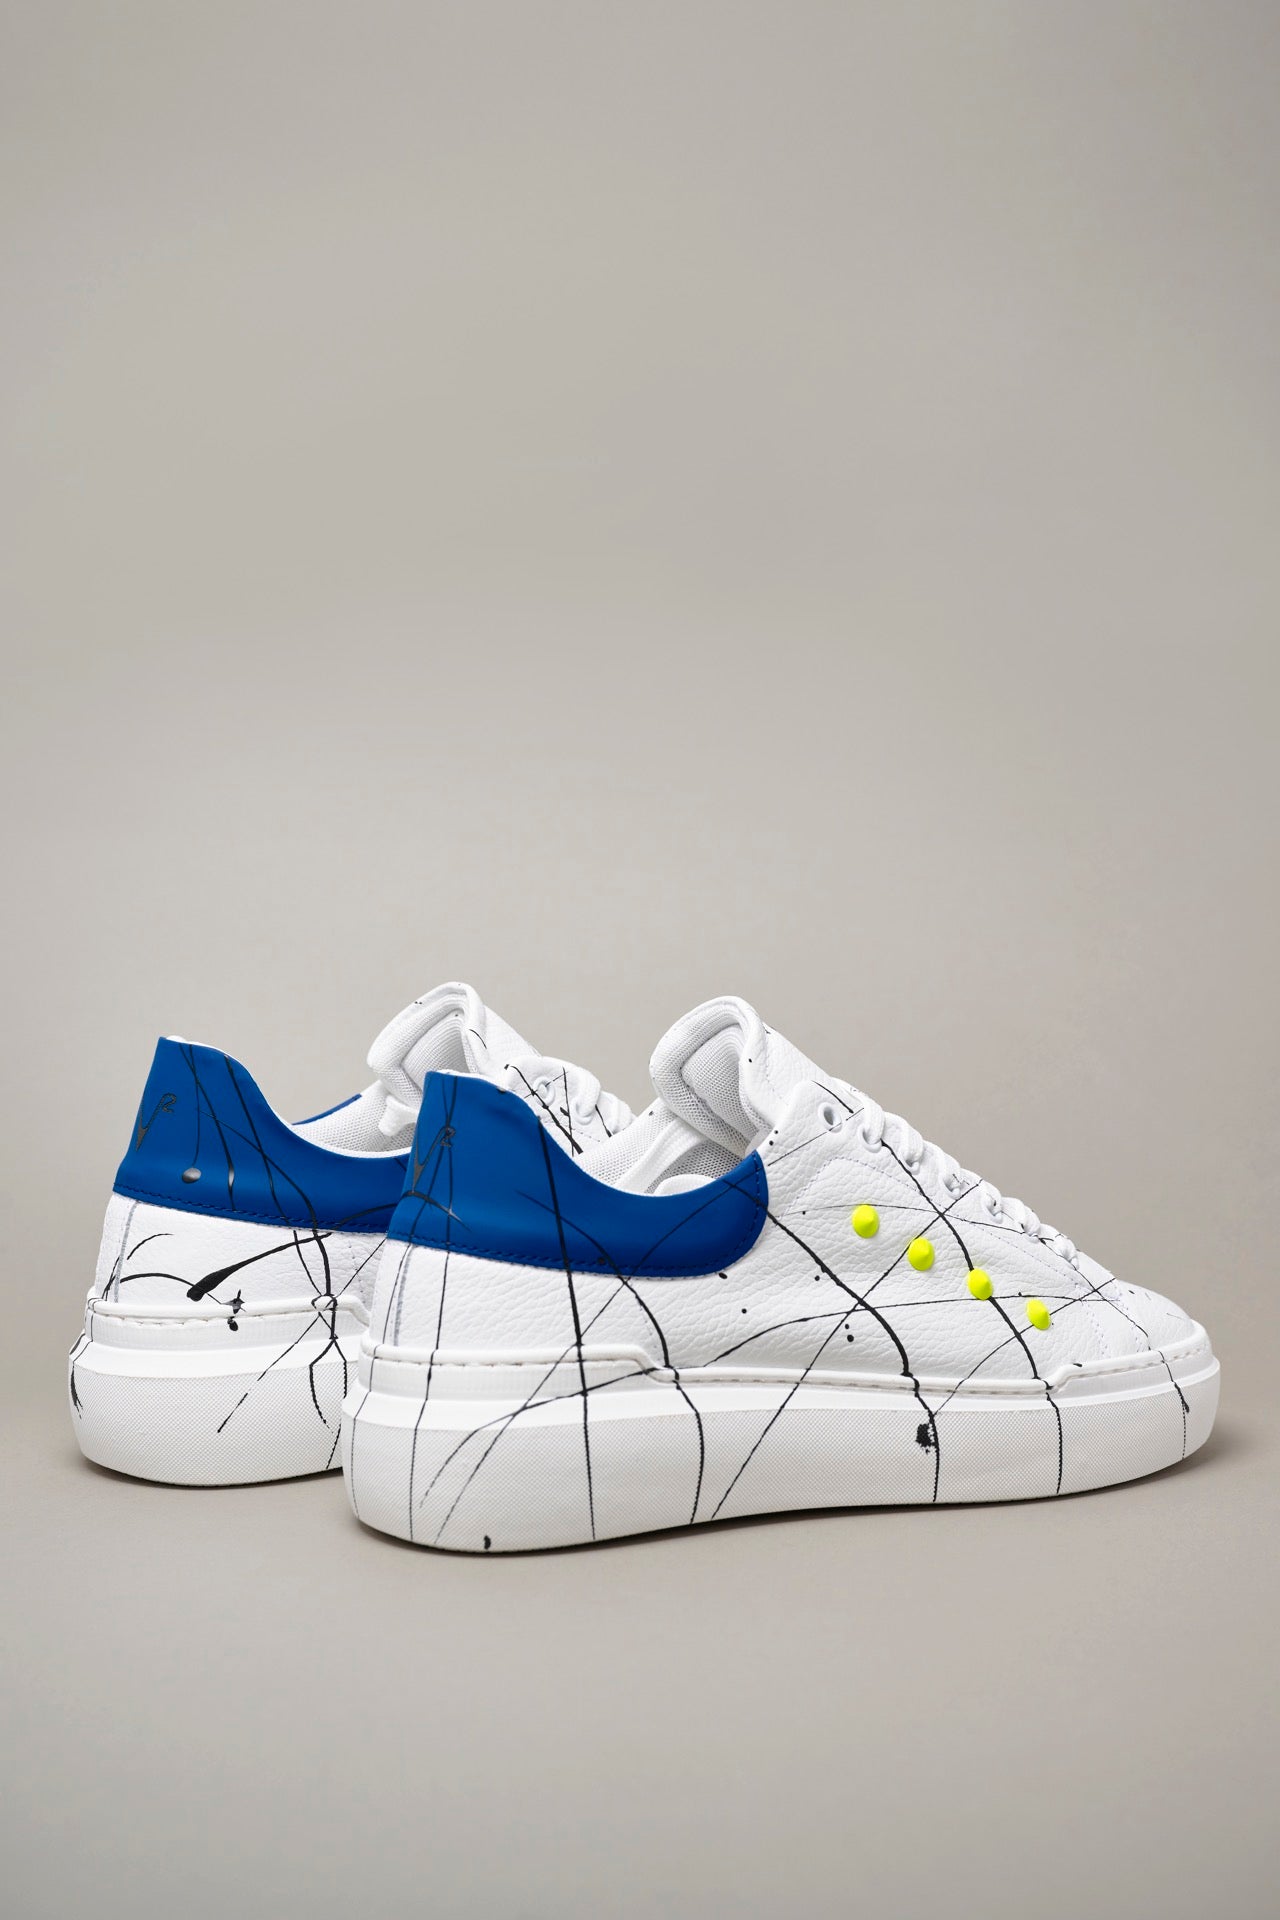 HAMMER - High sole sneakers in textured leather with Royal Blue back with Fluo Yellow studs and paint splashes